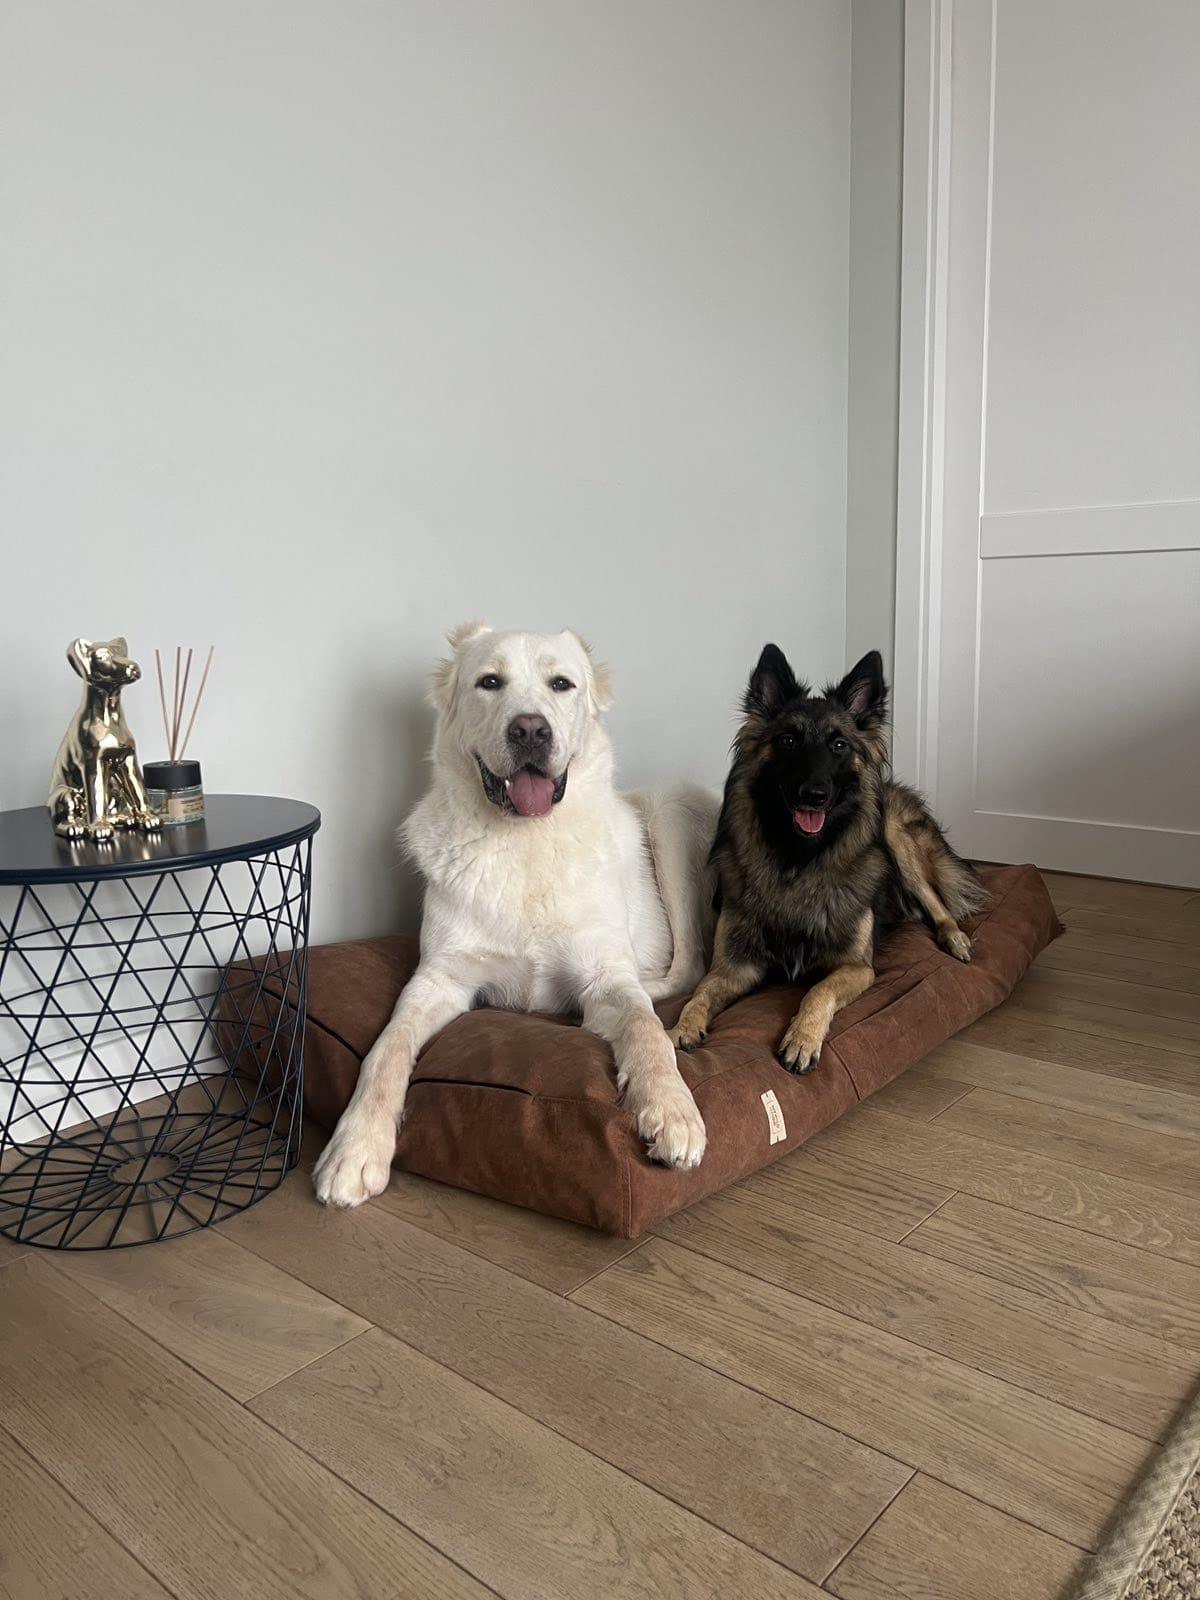 2-sided leather dog cushion bed. TAWNY BROWN - premium dog goods handmade in Europe by My Wild Other